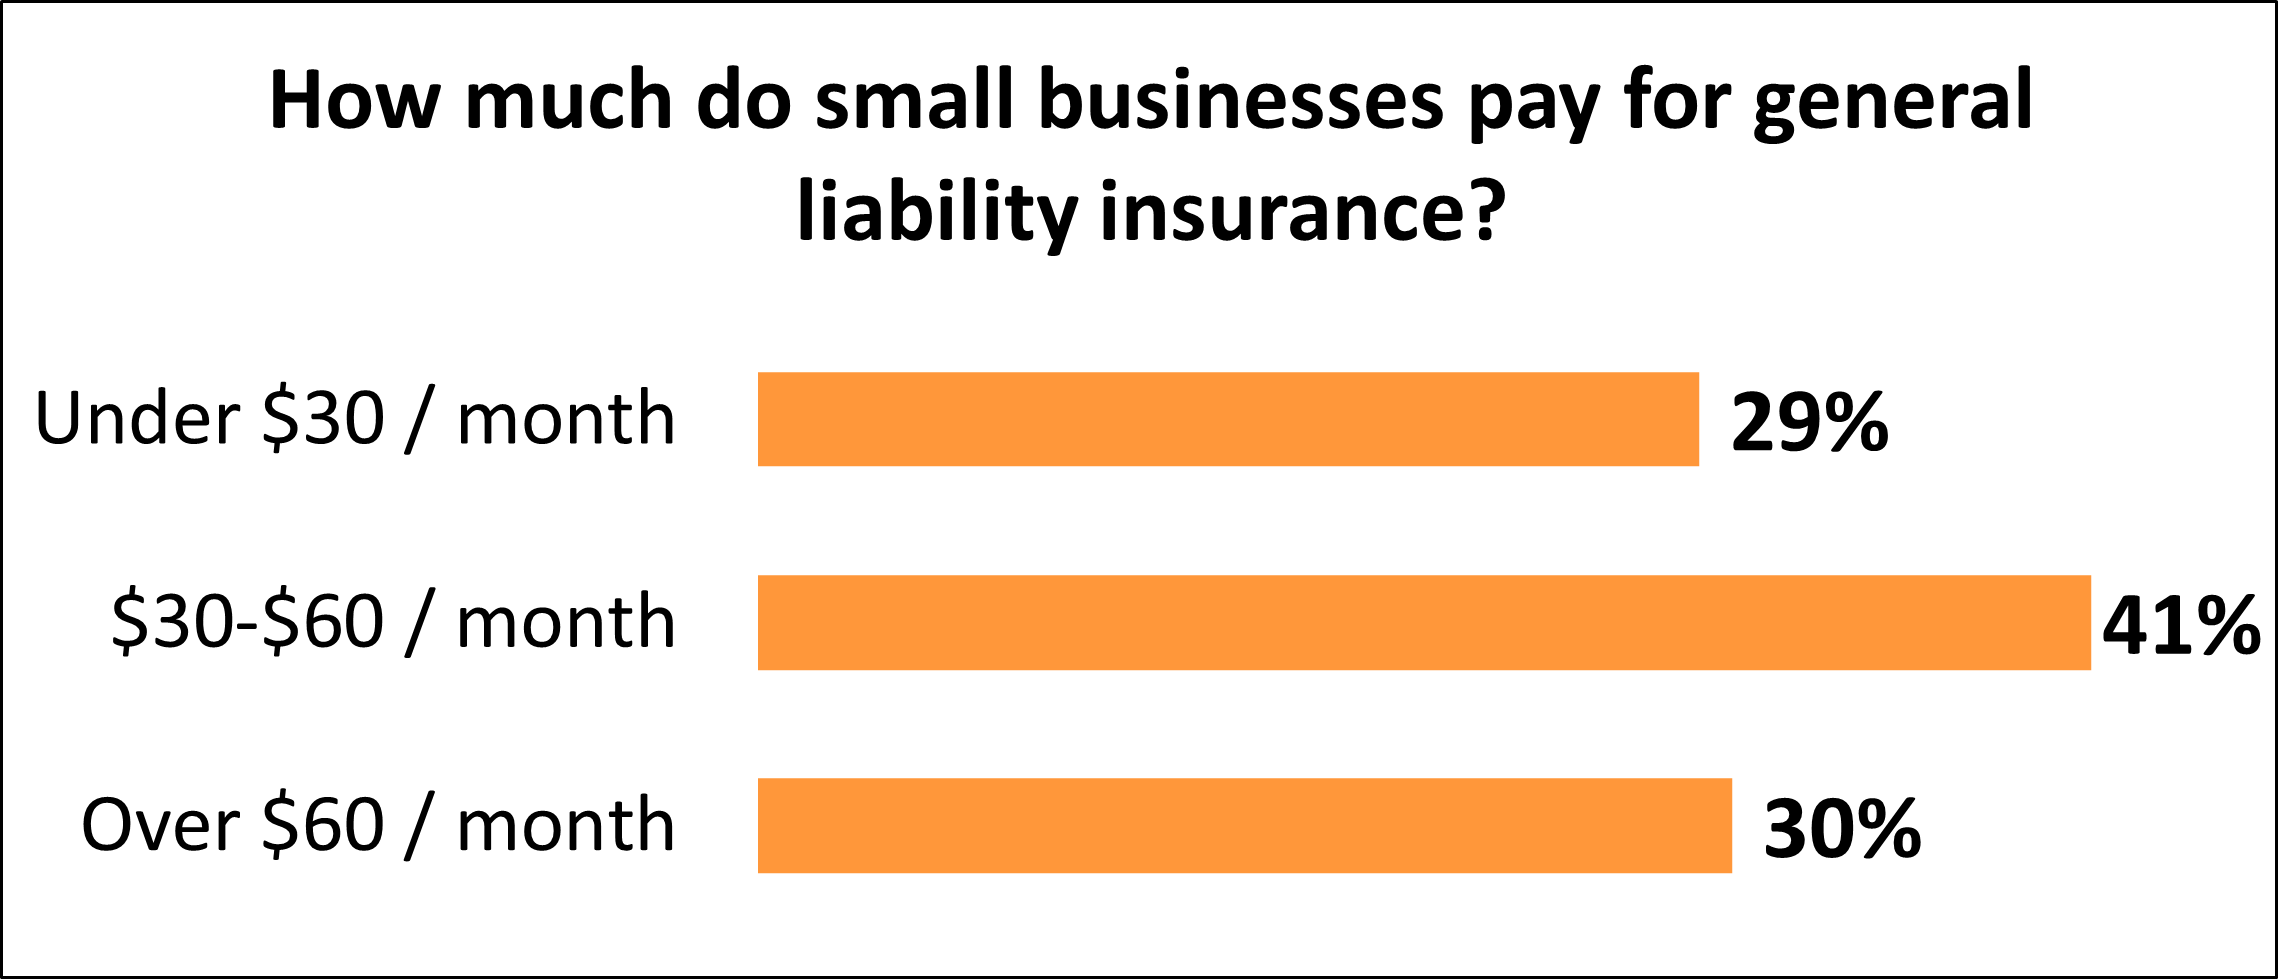 how much is liability insurance for a small business?